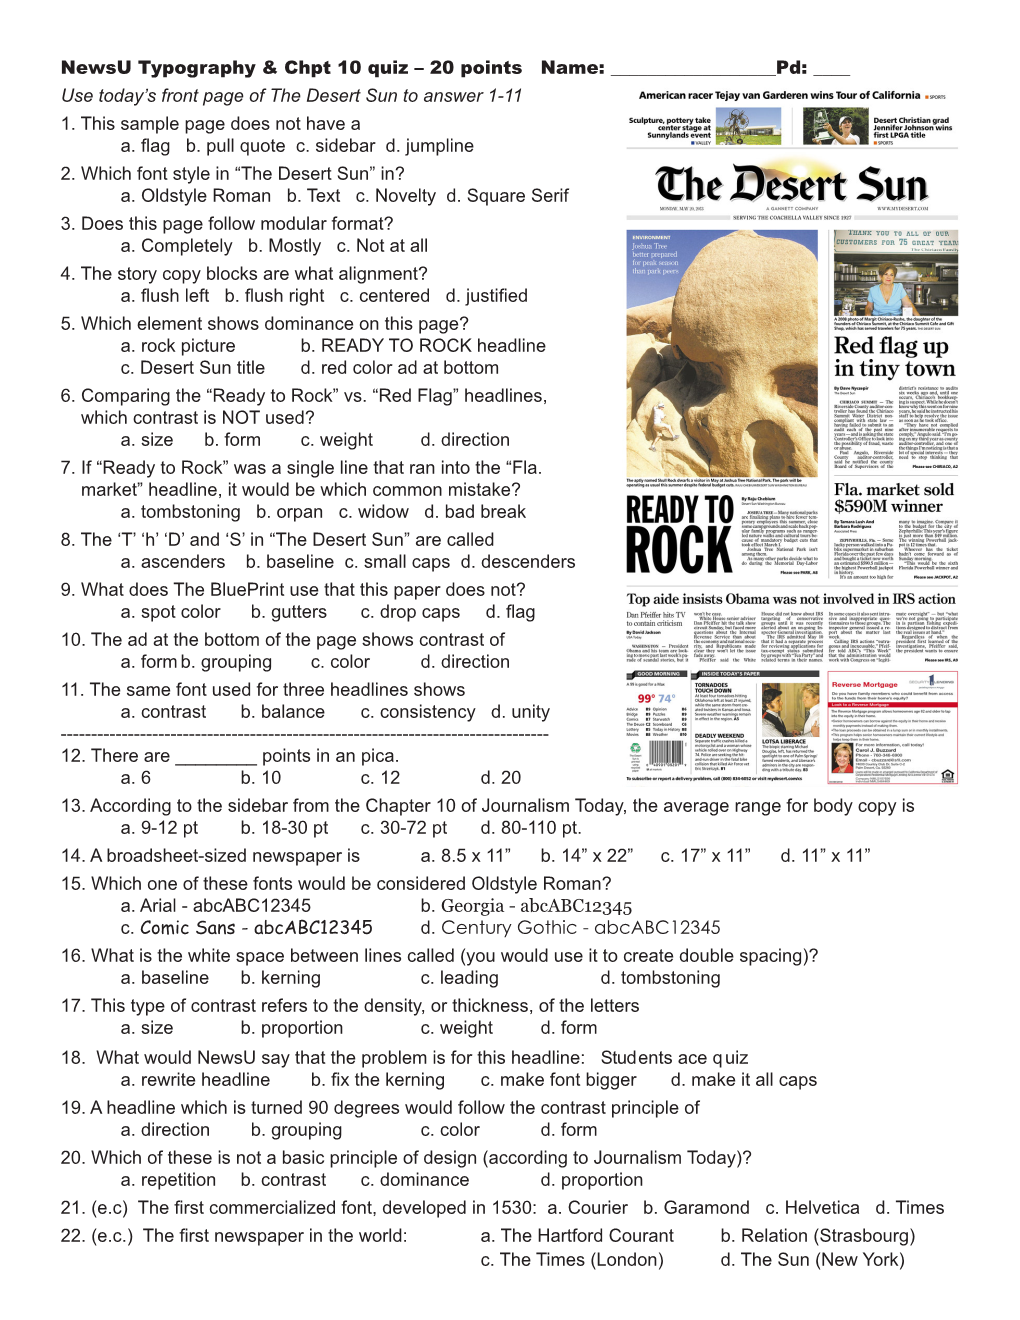 Use Today's Front Page of the Desert Sun To